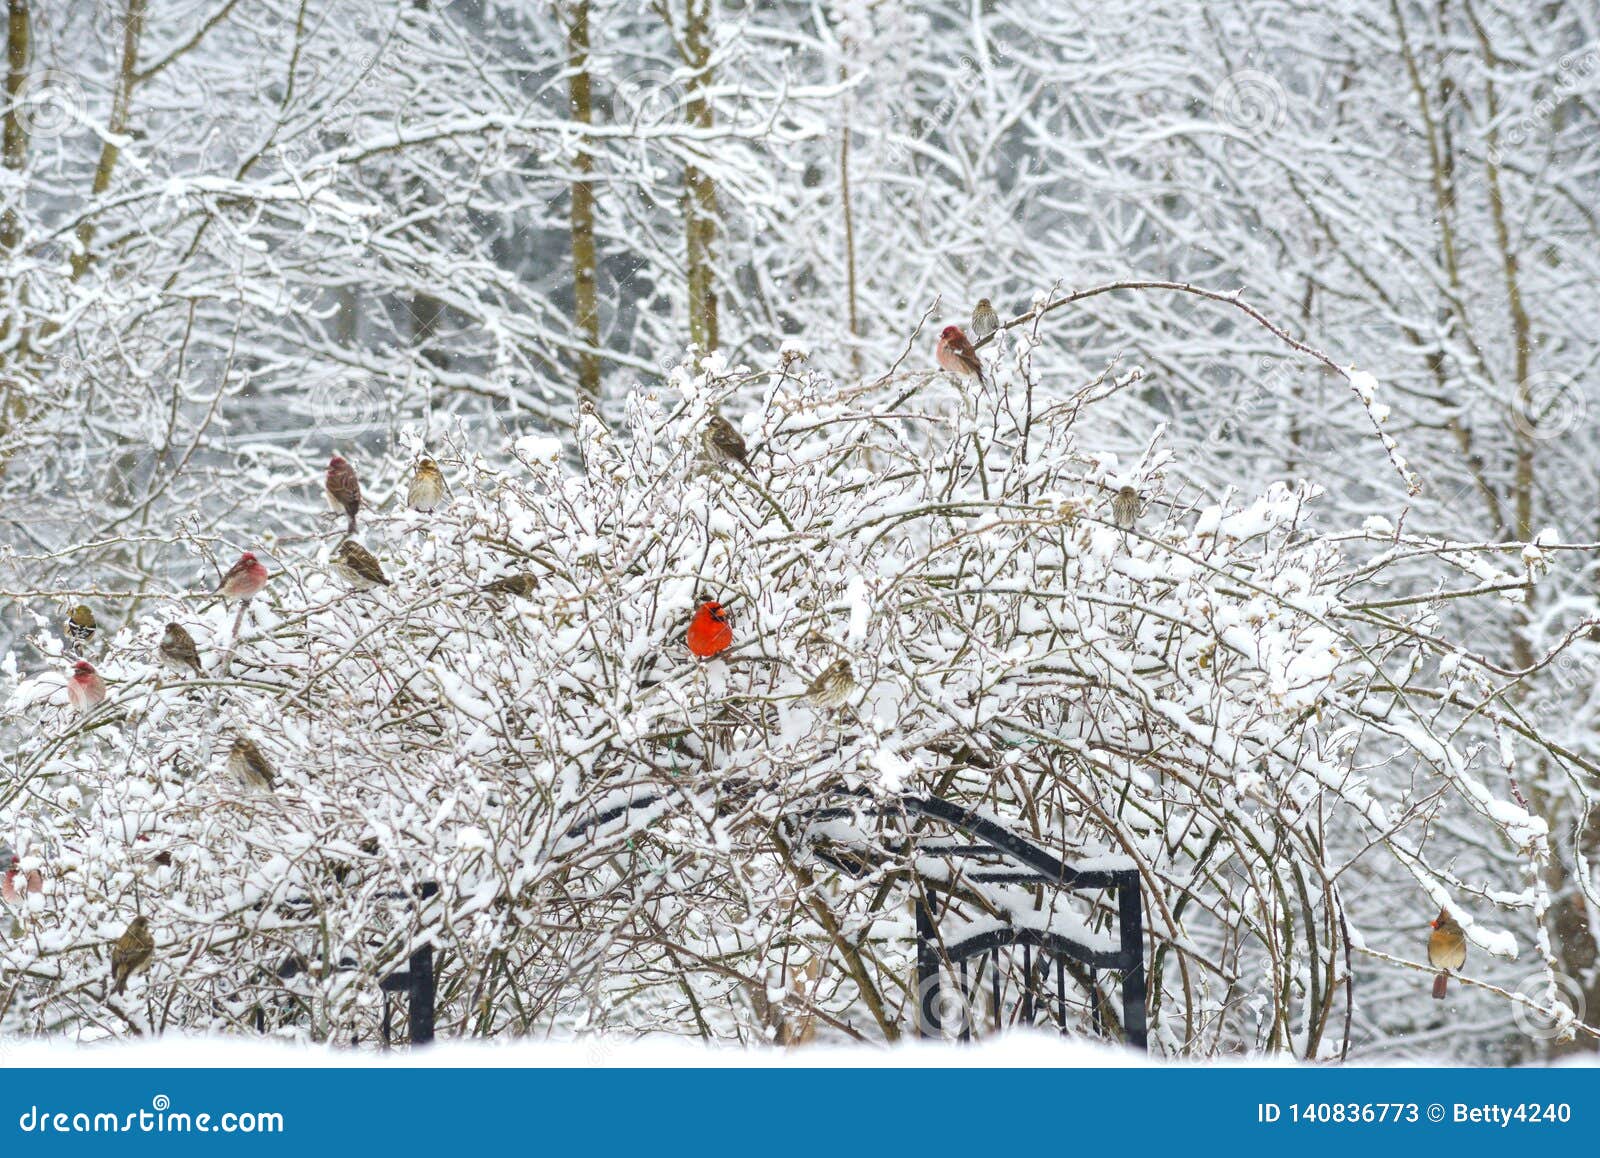 a red cardinals sit in a snowy with other songbirds.